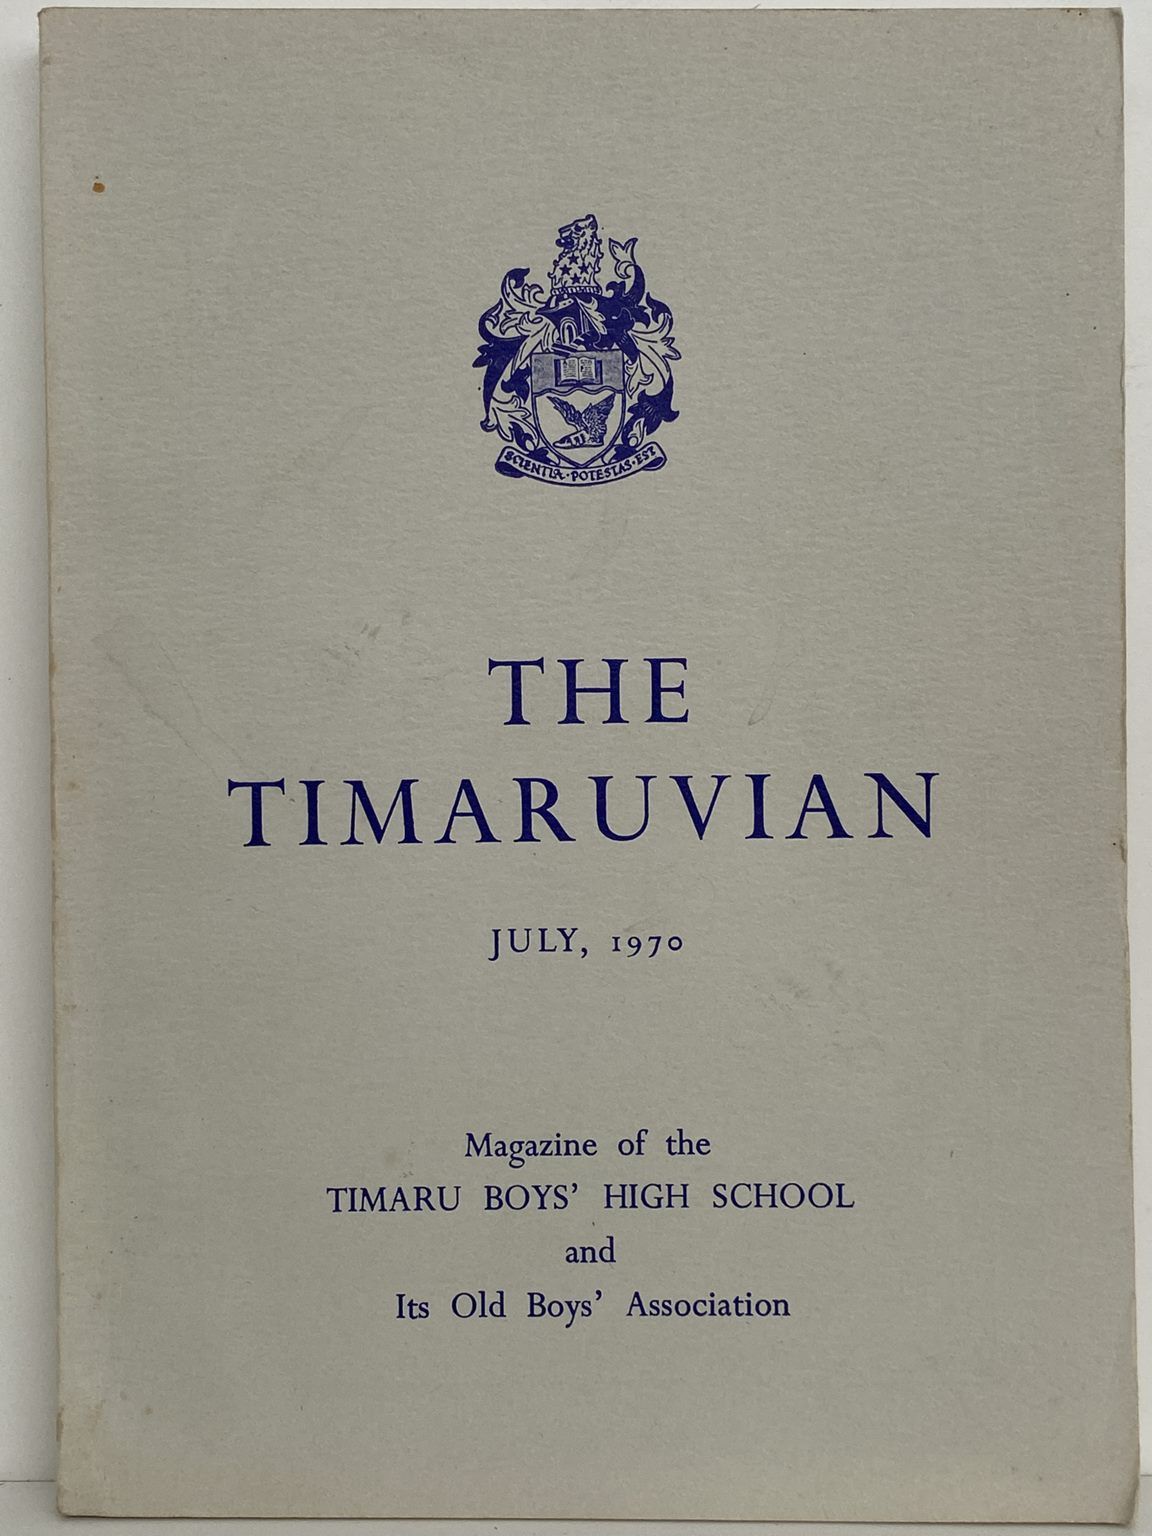 THE TIMARUVIAN: Magazine of the Timaru Boys' High School and its Old Boys' Association 1970